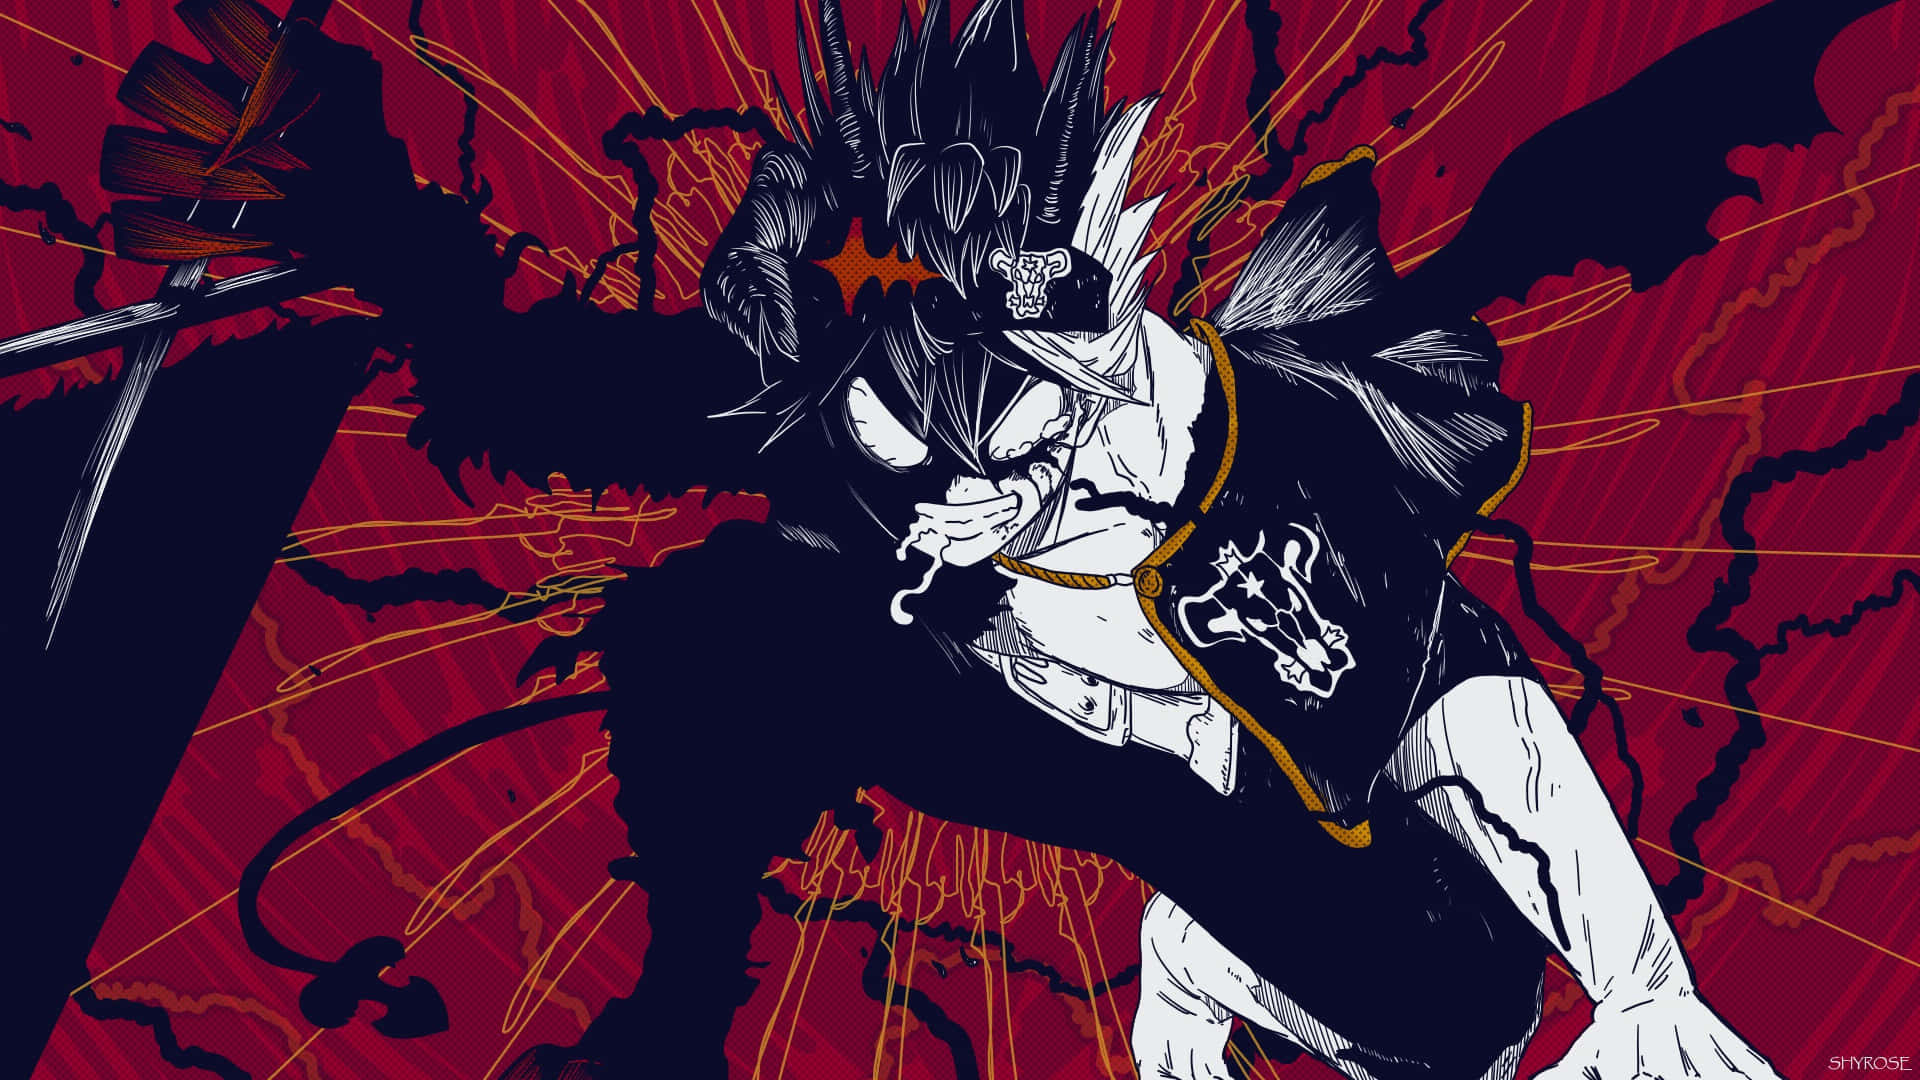 Asta Live wallpaper (Black Clover) _ Any requests ??? i'll try to make